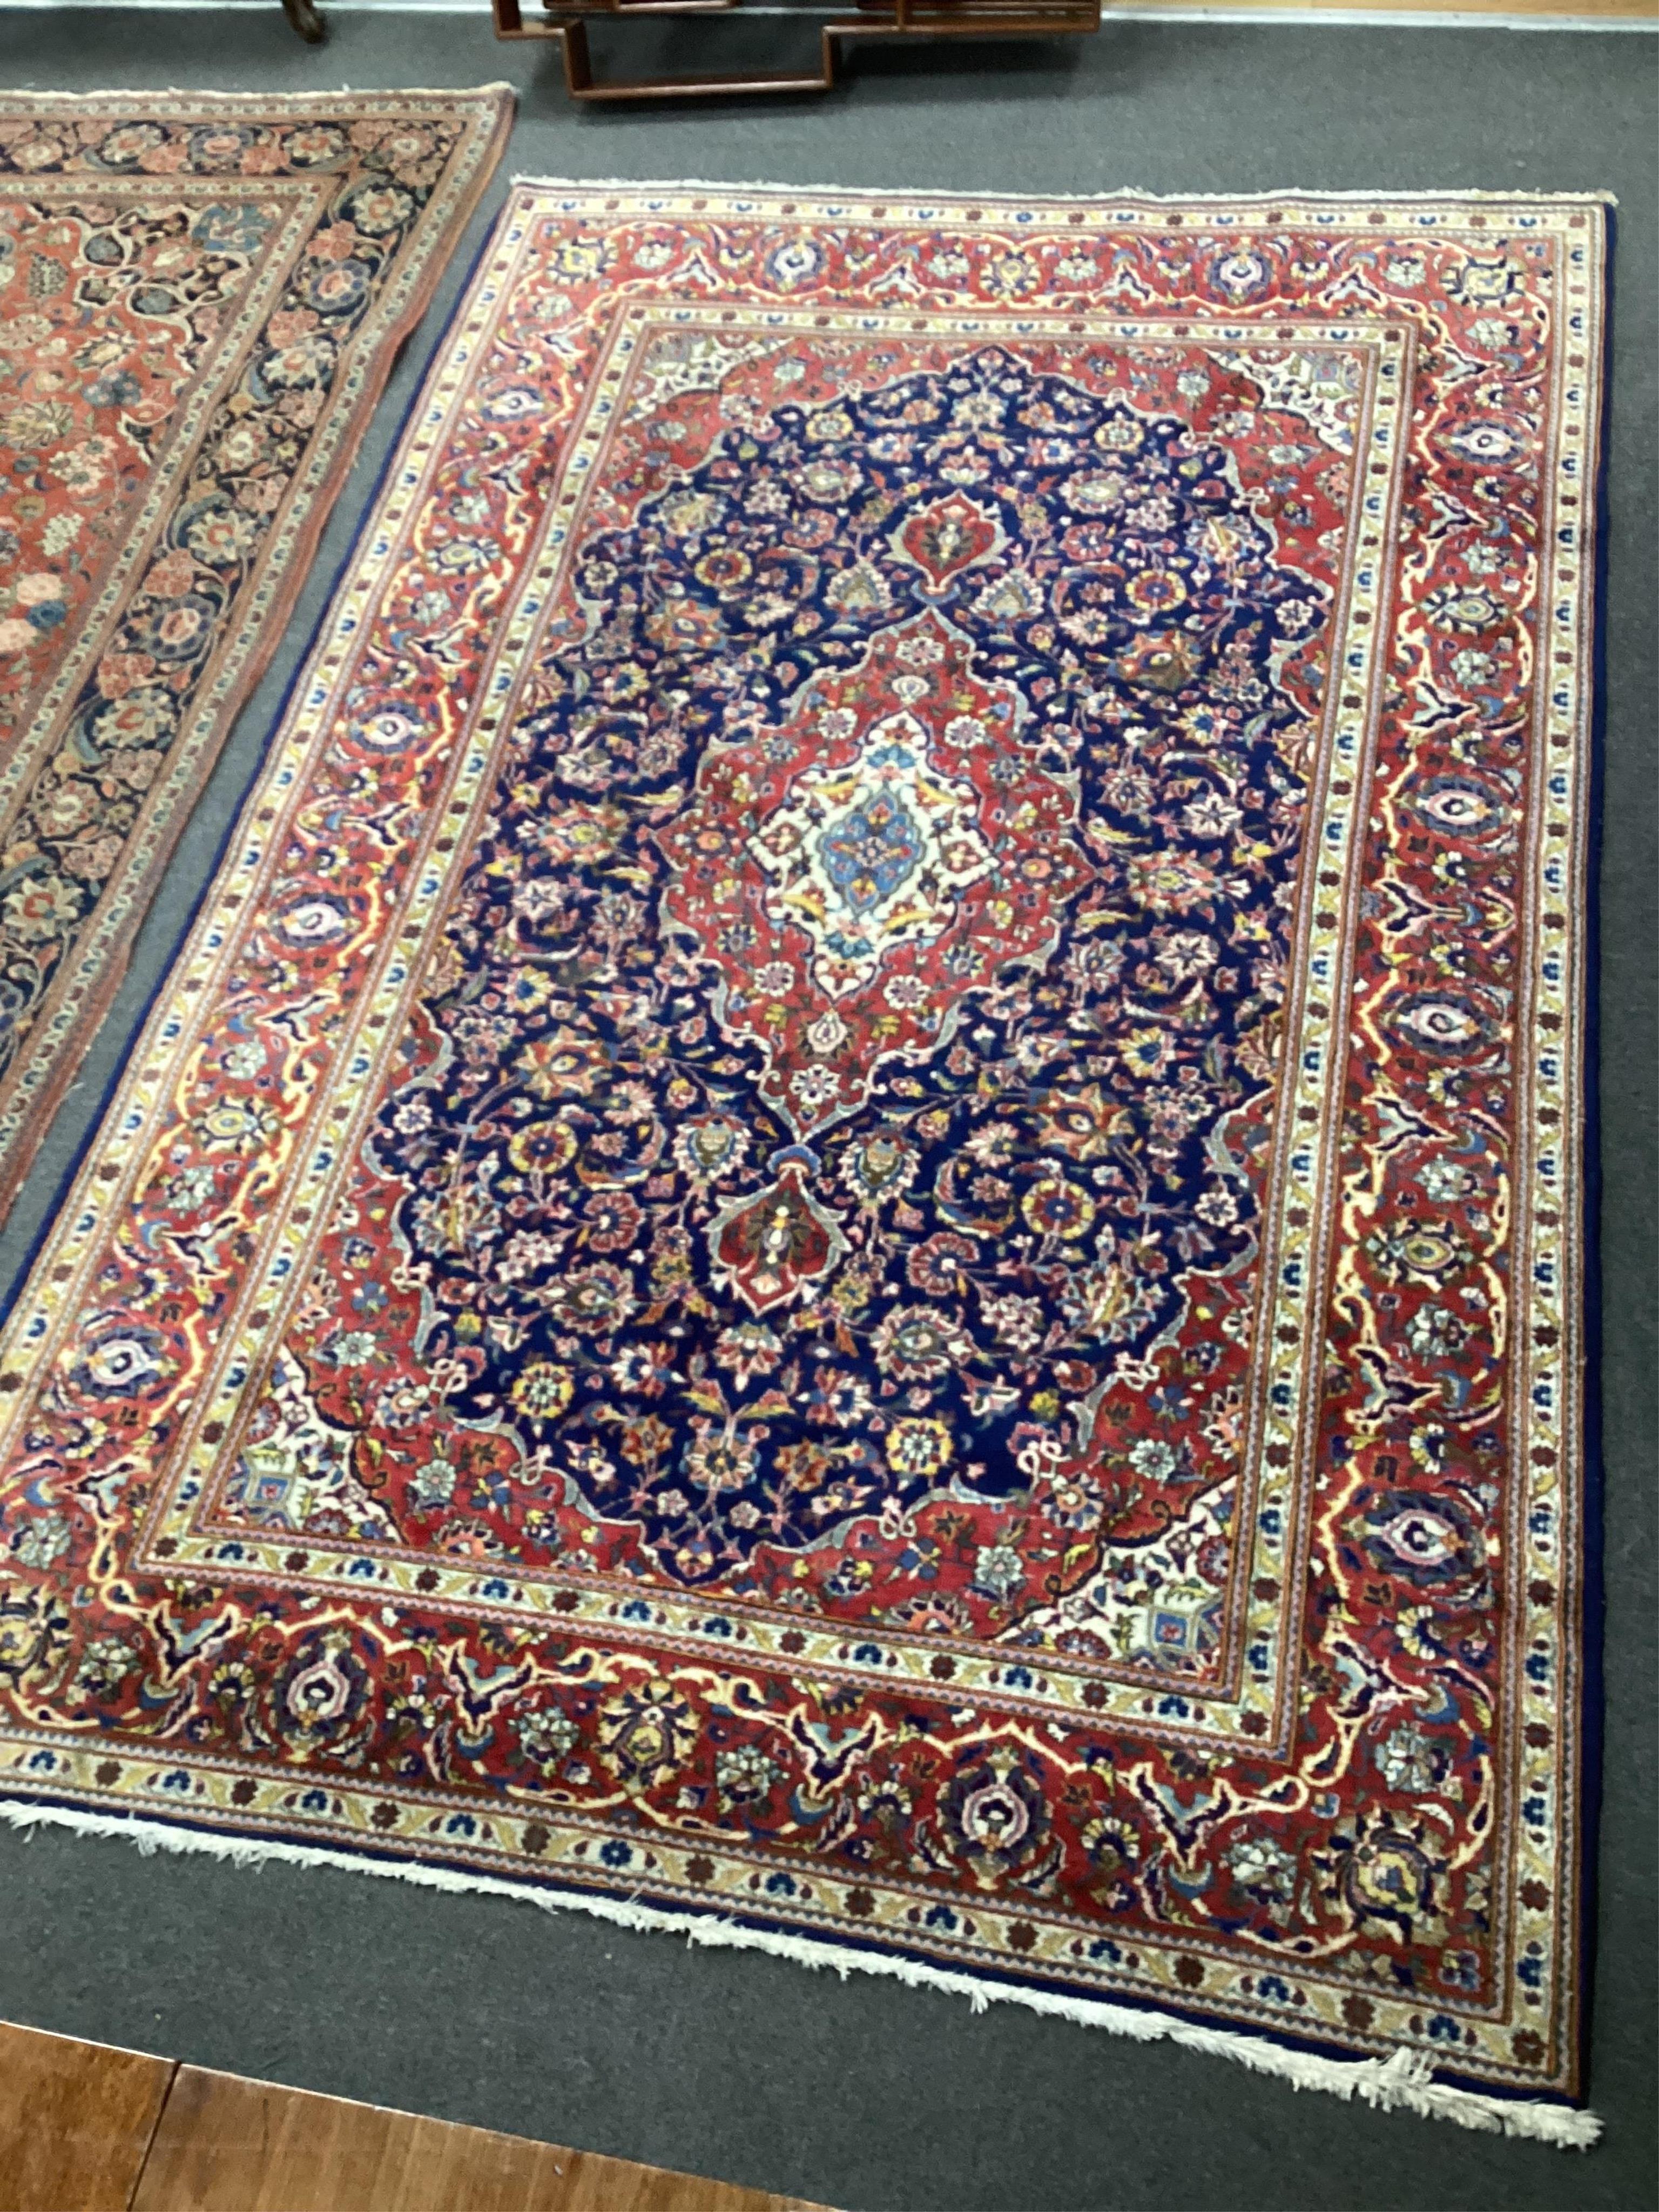 A North West Persian blue ground rug, 210 x 141cm. Condition - good